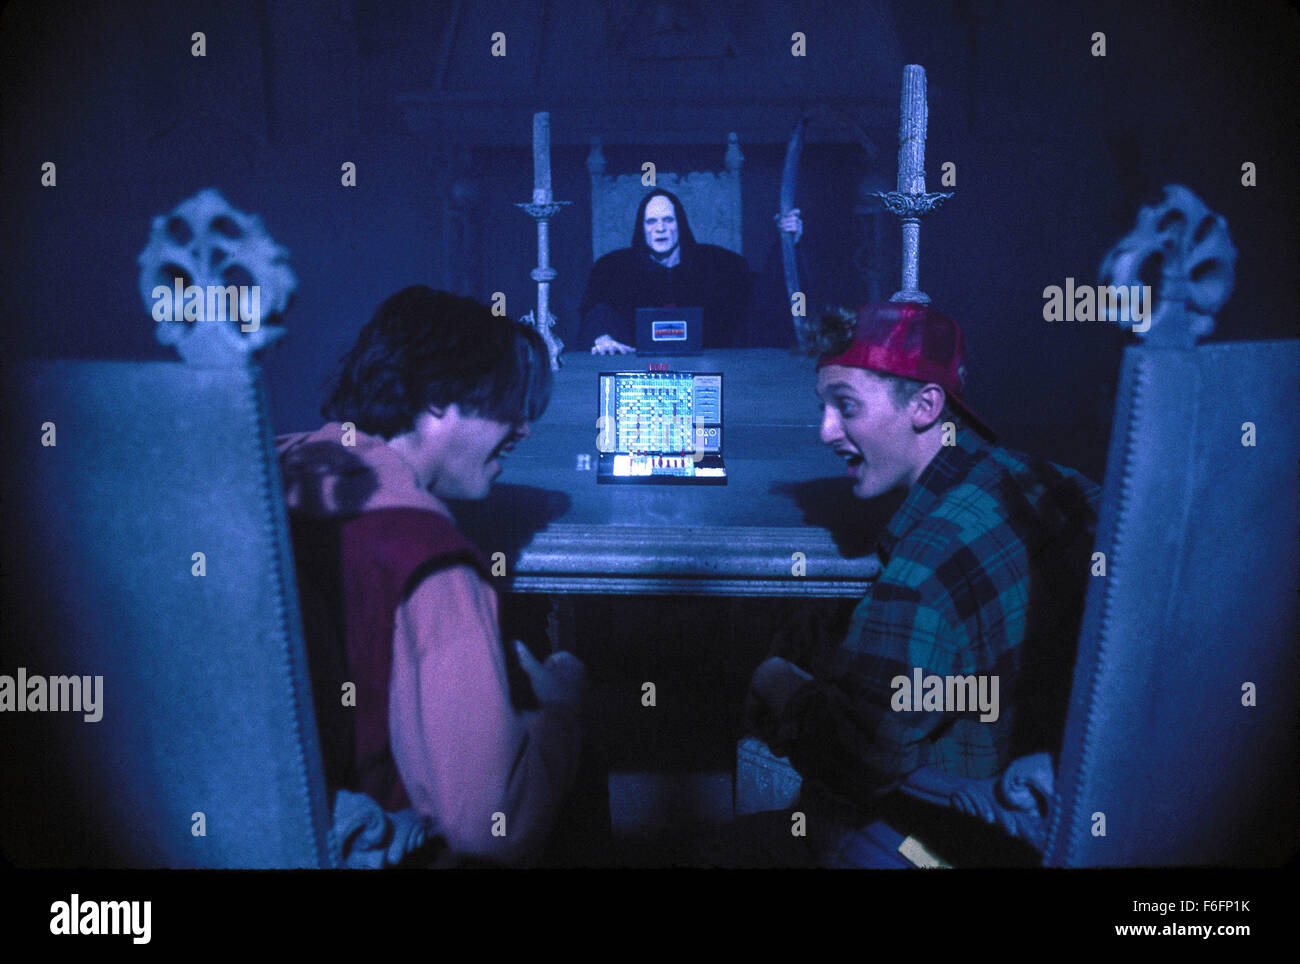 Jul 19, 1991; Los Angeles, CA, USA; KEANU REEVES (left) as Ted Logan and ALEX WINTERS as Bill S. Preston, Esq. in the adventure, sci-fi, comic film 'Bill and Ted's Bogus Journey' directed by Peter Hewitt. Stock Photo